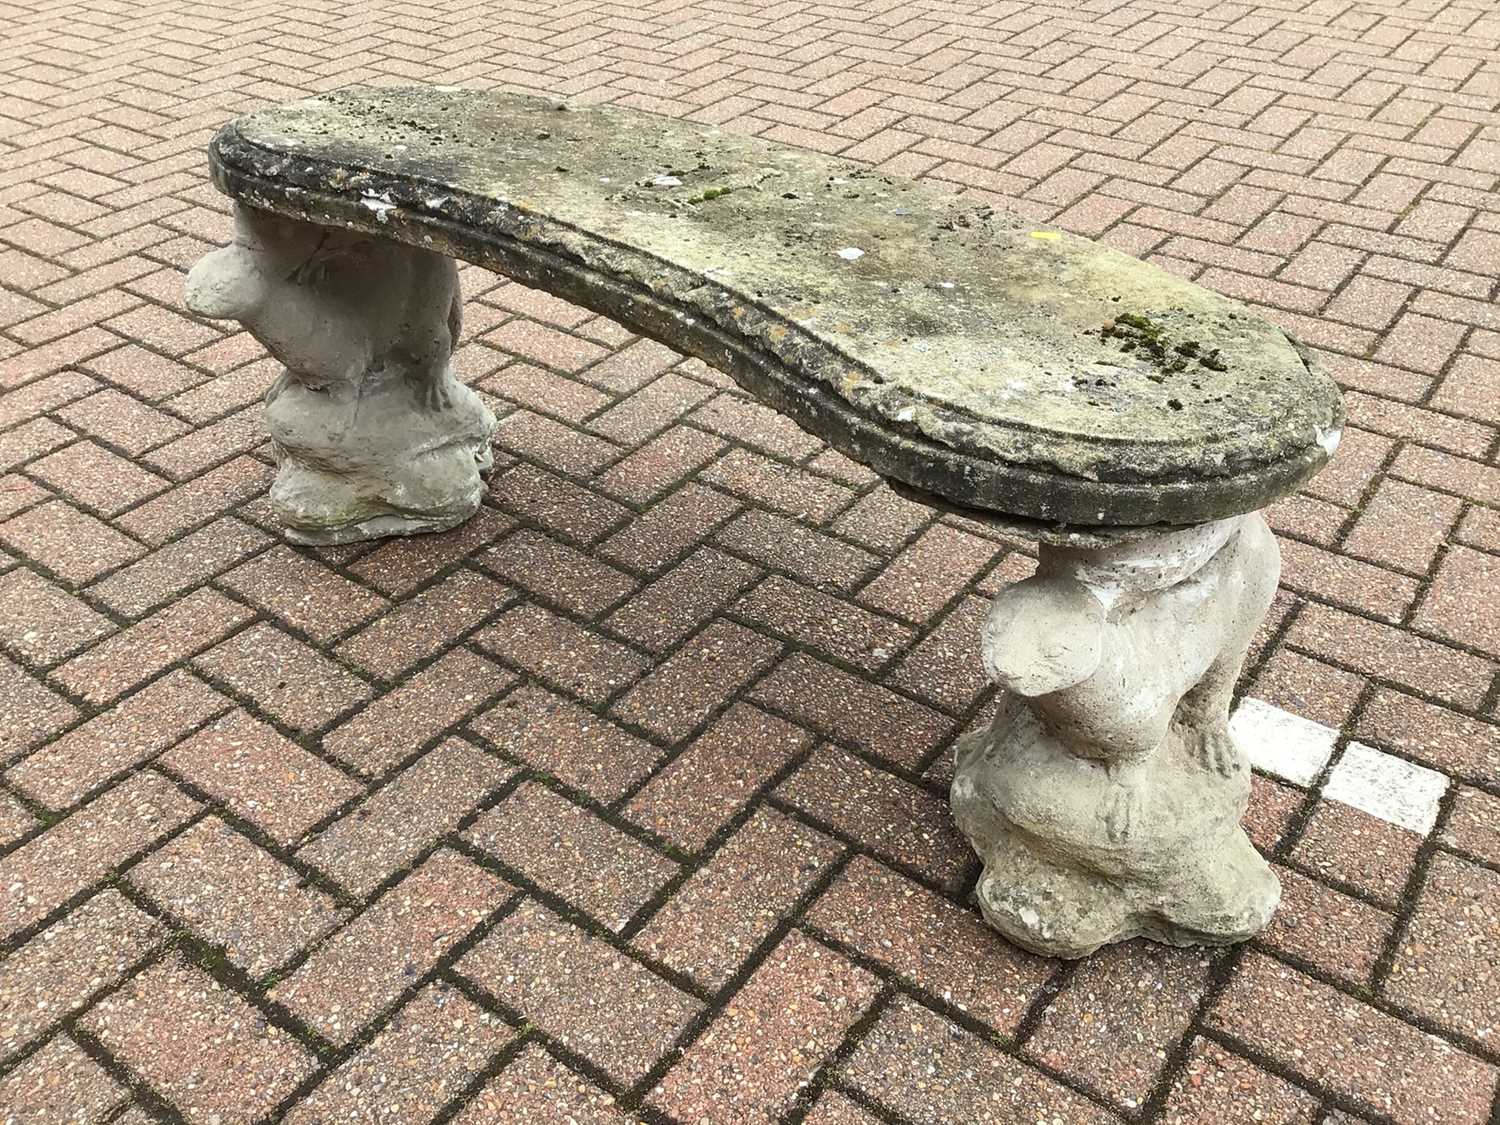 Concrete garden bench with otter supports 115cm x 47cm